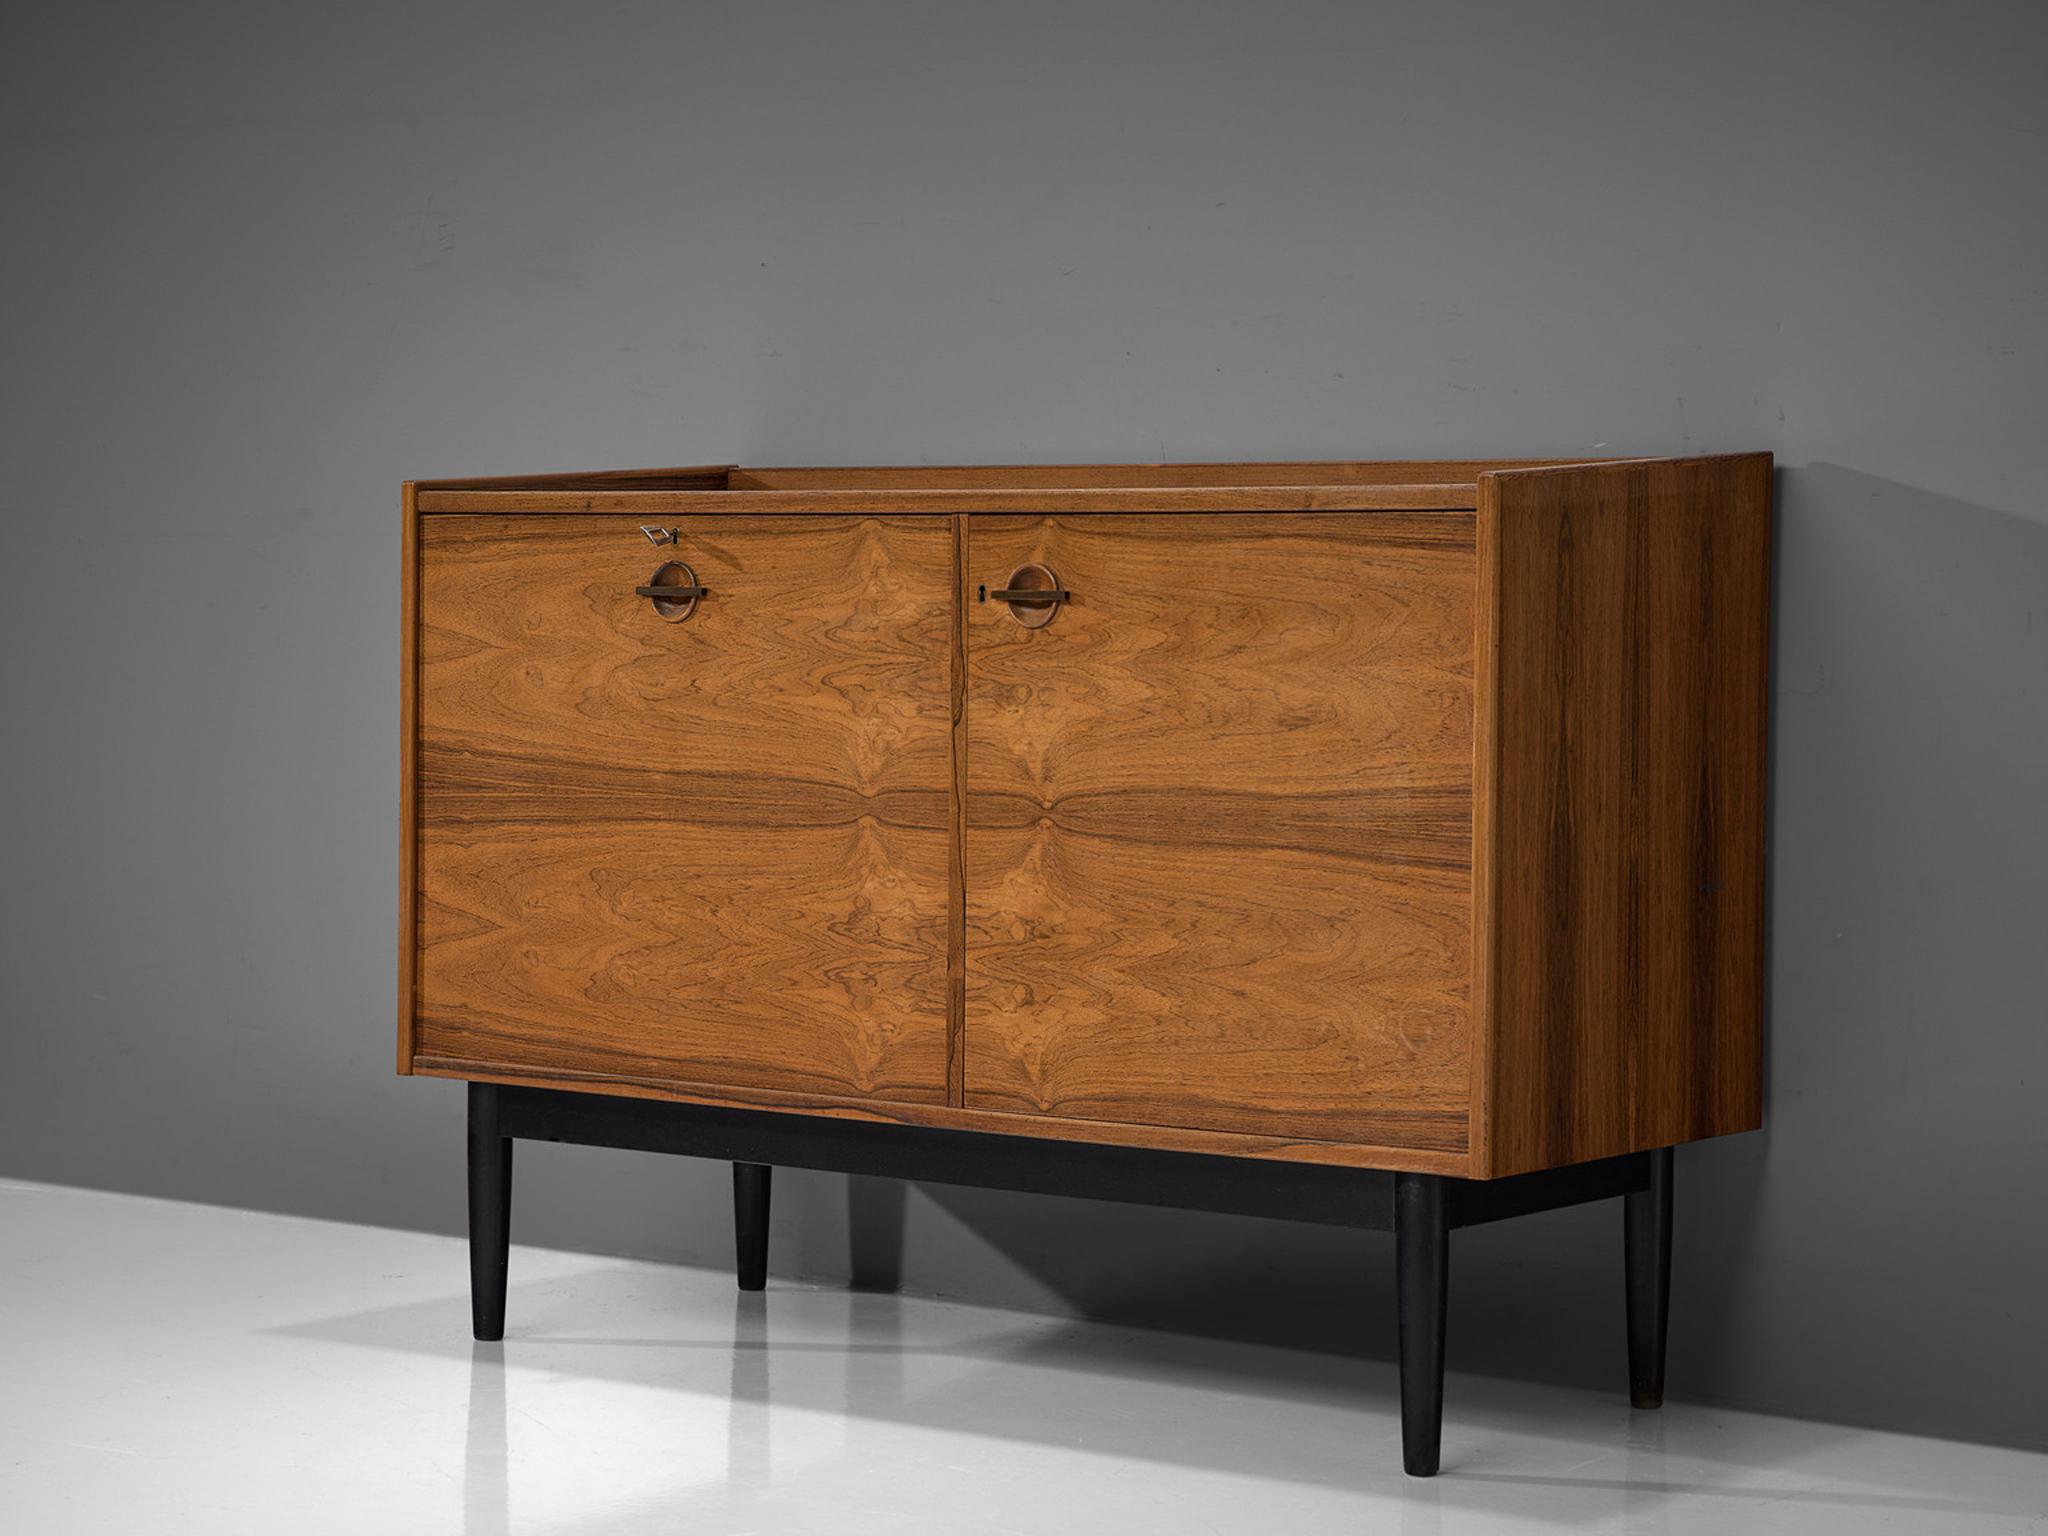 Hans Olsen for Brande Mobler, bar cabinet, rosewood and metal, Denmark, 1960s

A unique piece by designer Danish Hans Olsen provides varied storage facilities designed to be used as a dry bar. On the left bottle holders are integrated into the